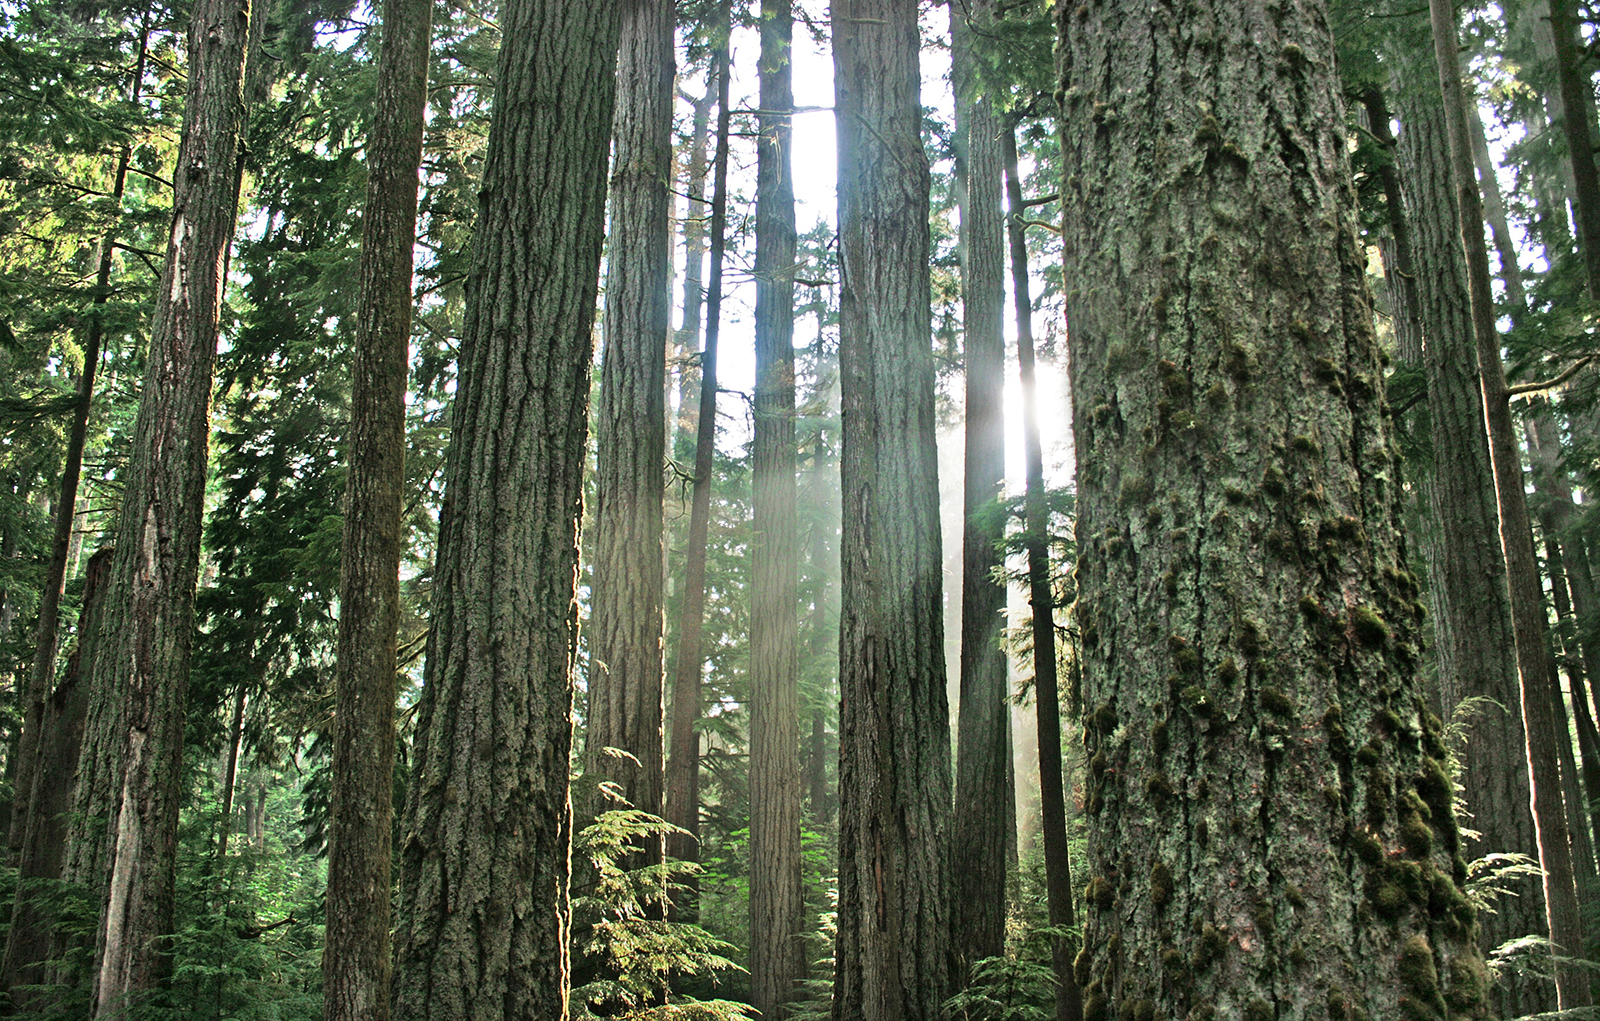 Image of BC coastal temperate forest